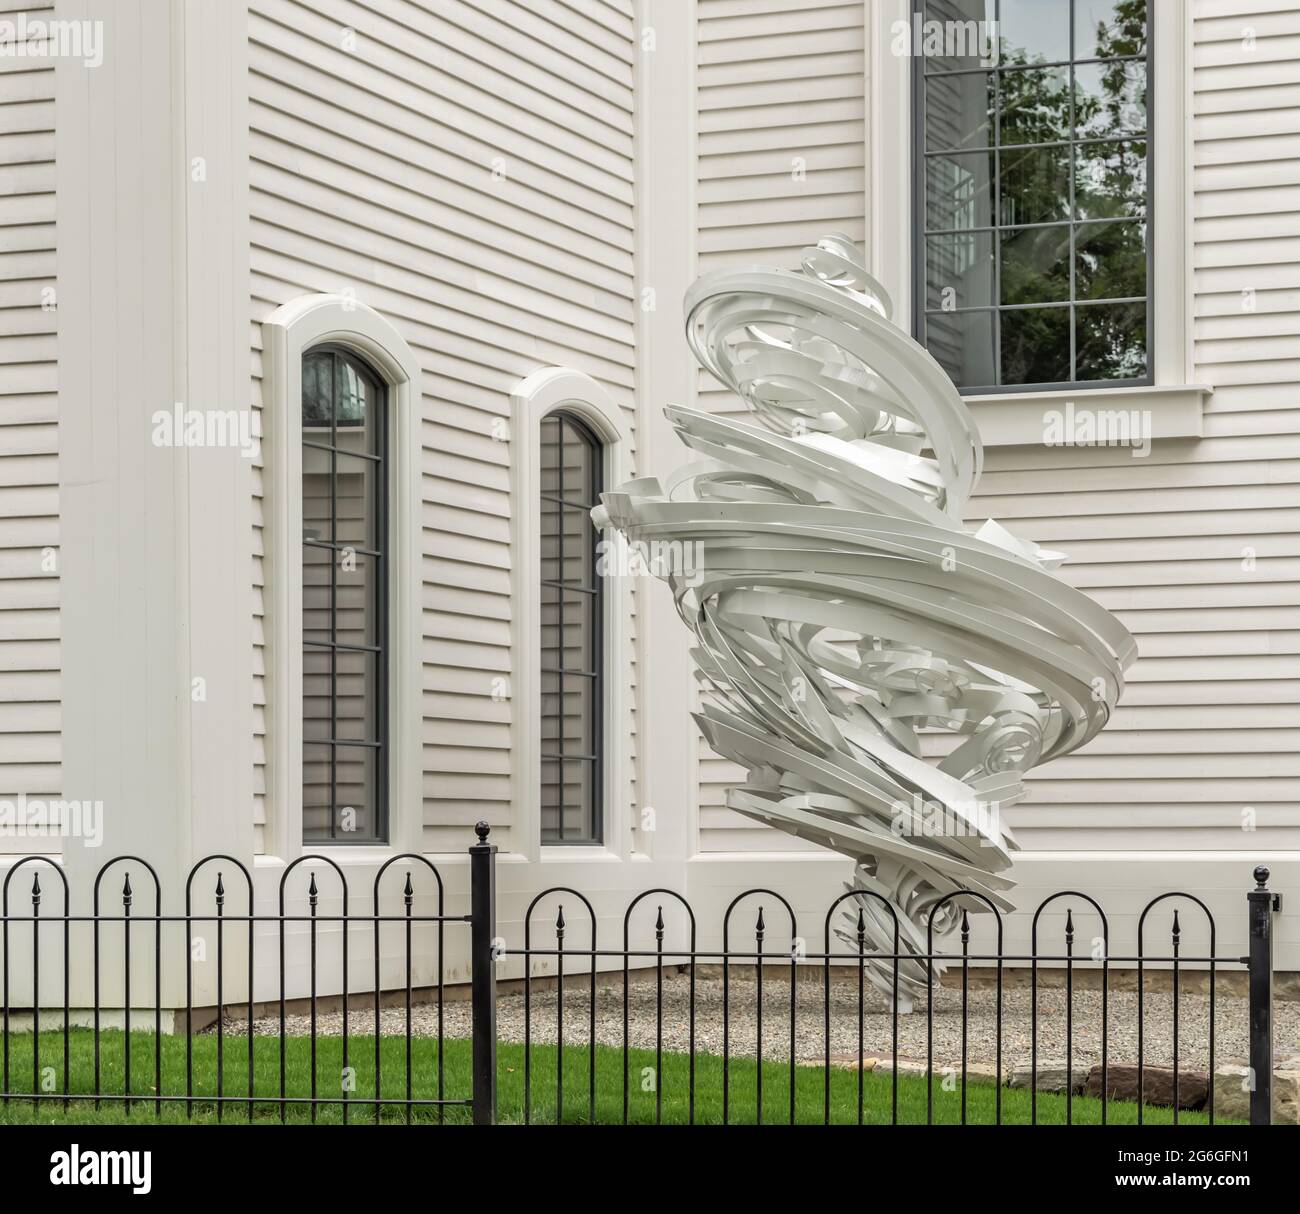 Alice Aycock's outdoor sculpture, Twister Grande at the Church in Sag Harbor, NY Stock Photo